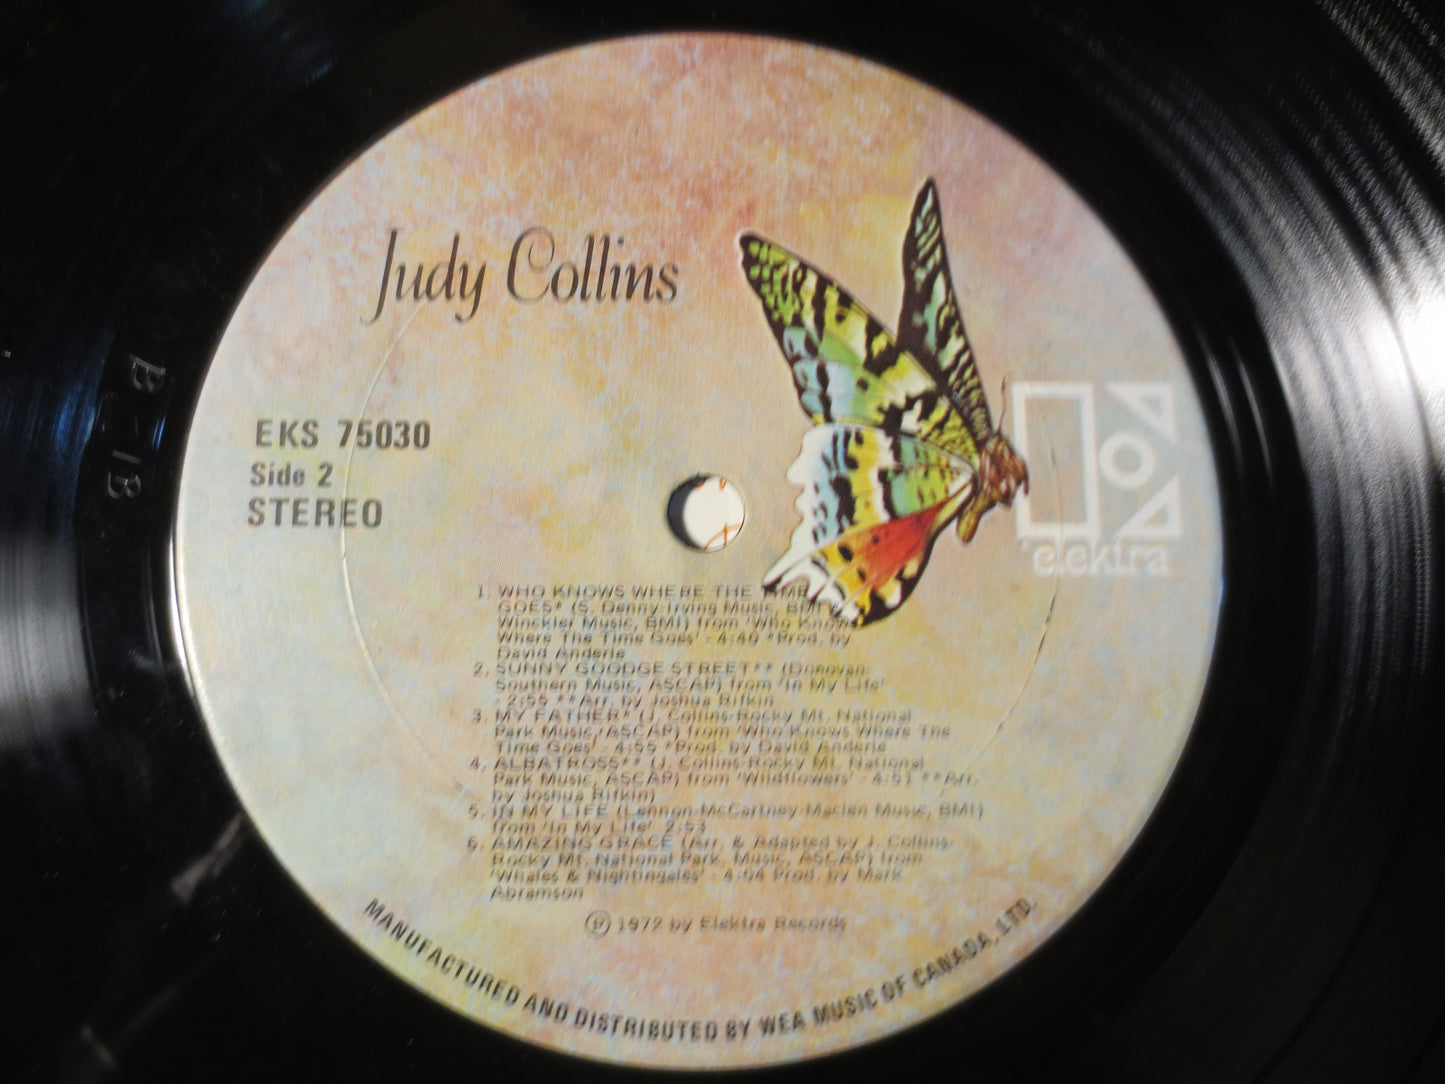 JUDY COLLINS Records, The BEST of, Judy Collins Album, Judy Collins Vinyl, Judy Collins Lp, Vintage Vinyl, 1972 Records